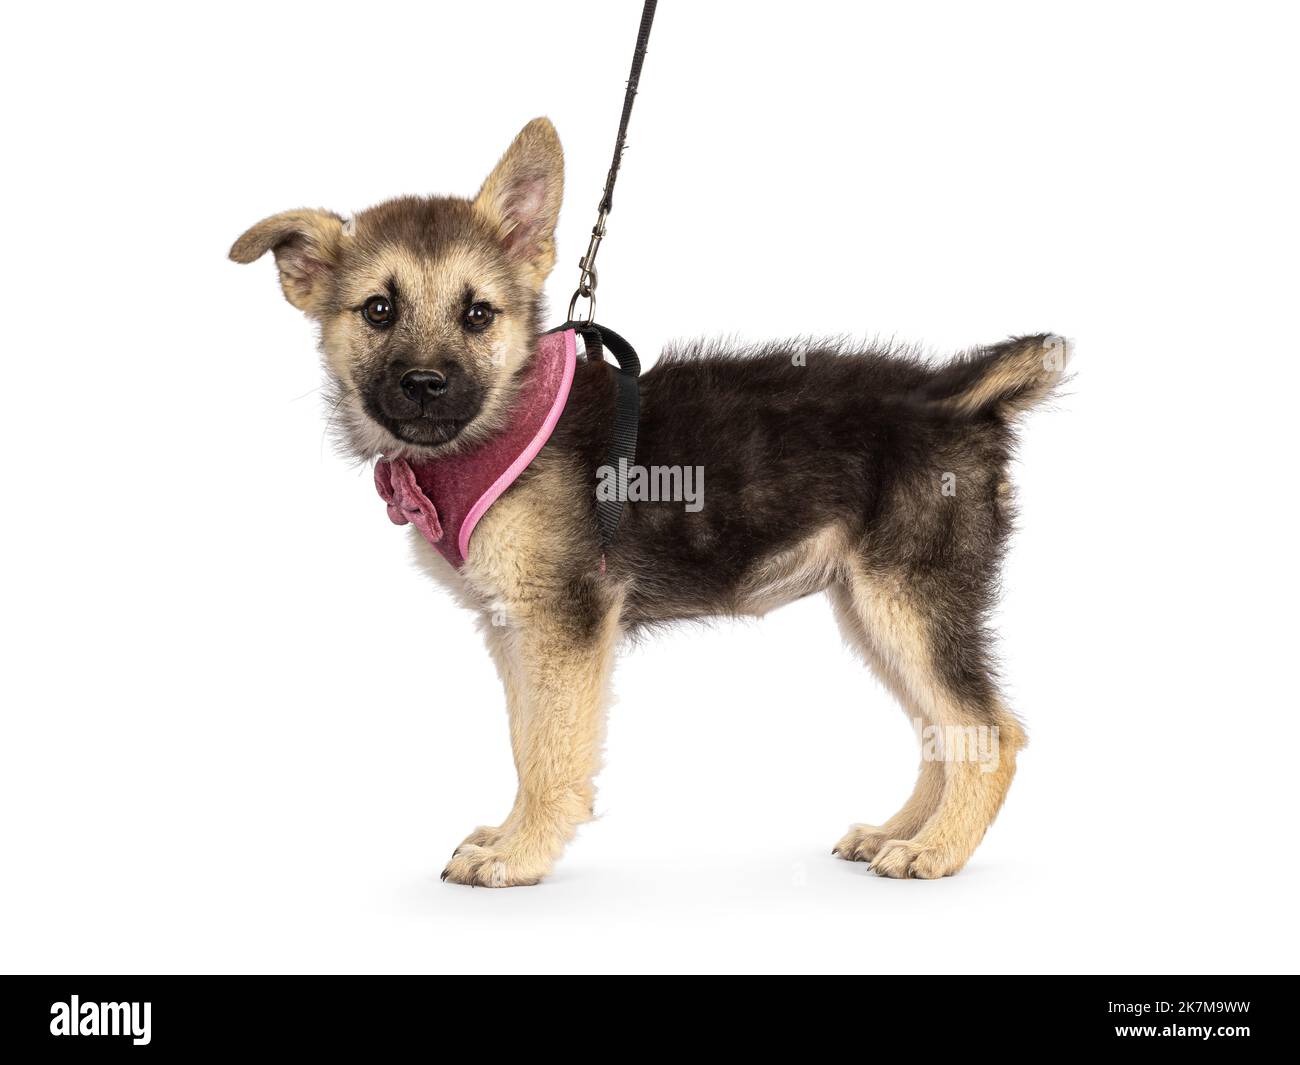 Adorable brown with black mixed Mudi and Germand Shepherd dog puppy, wearing harness. Standing side ways on a leash. Looking towards camera with one f Stock Photo